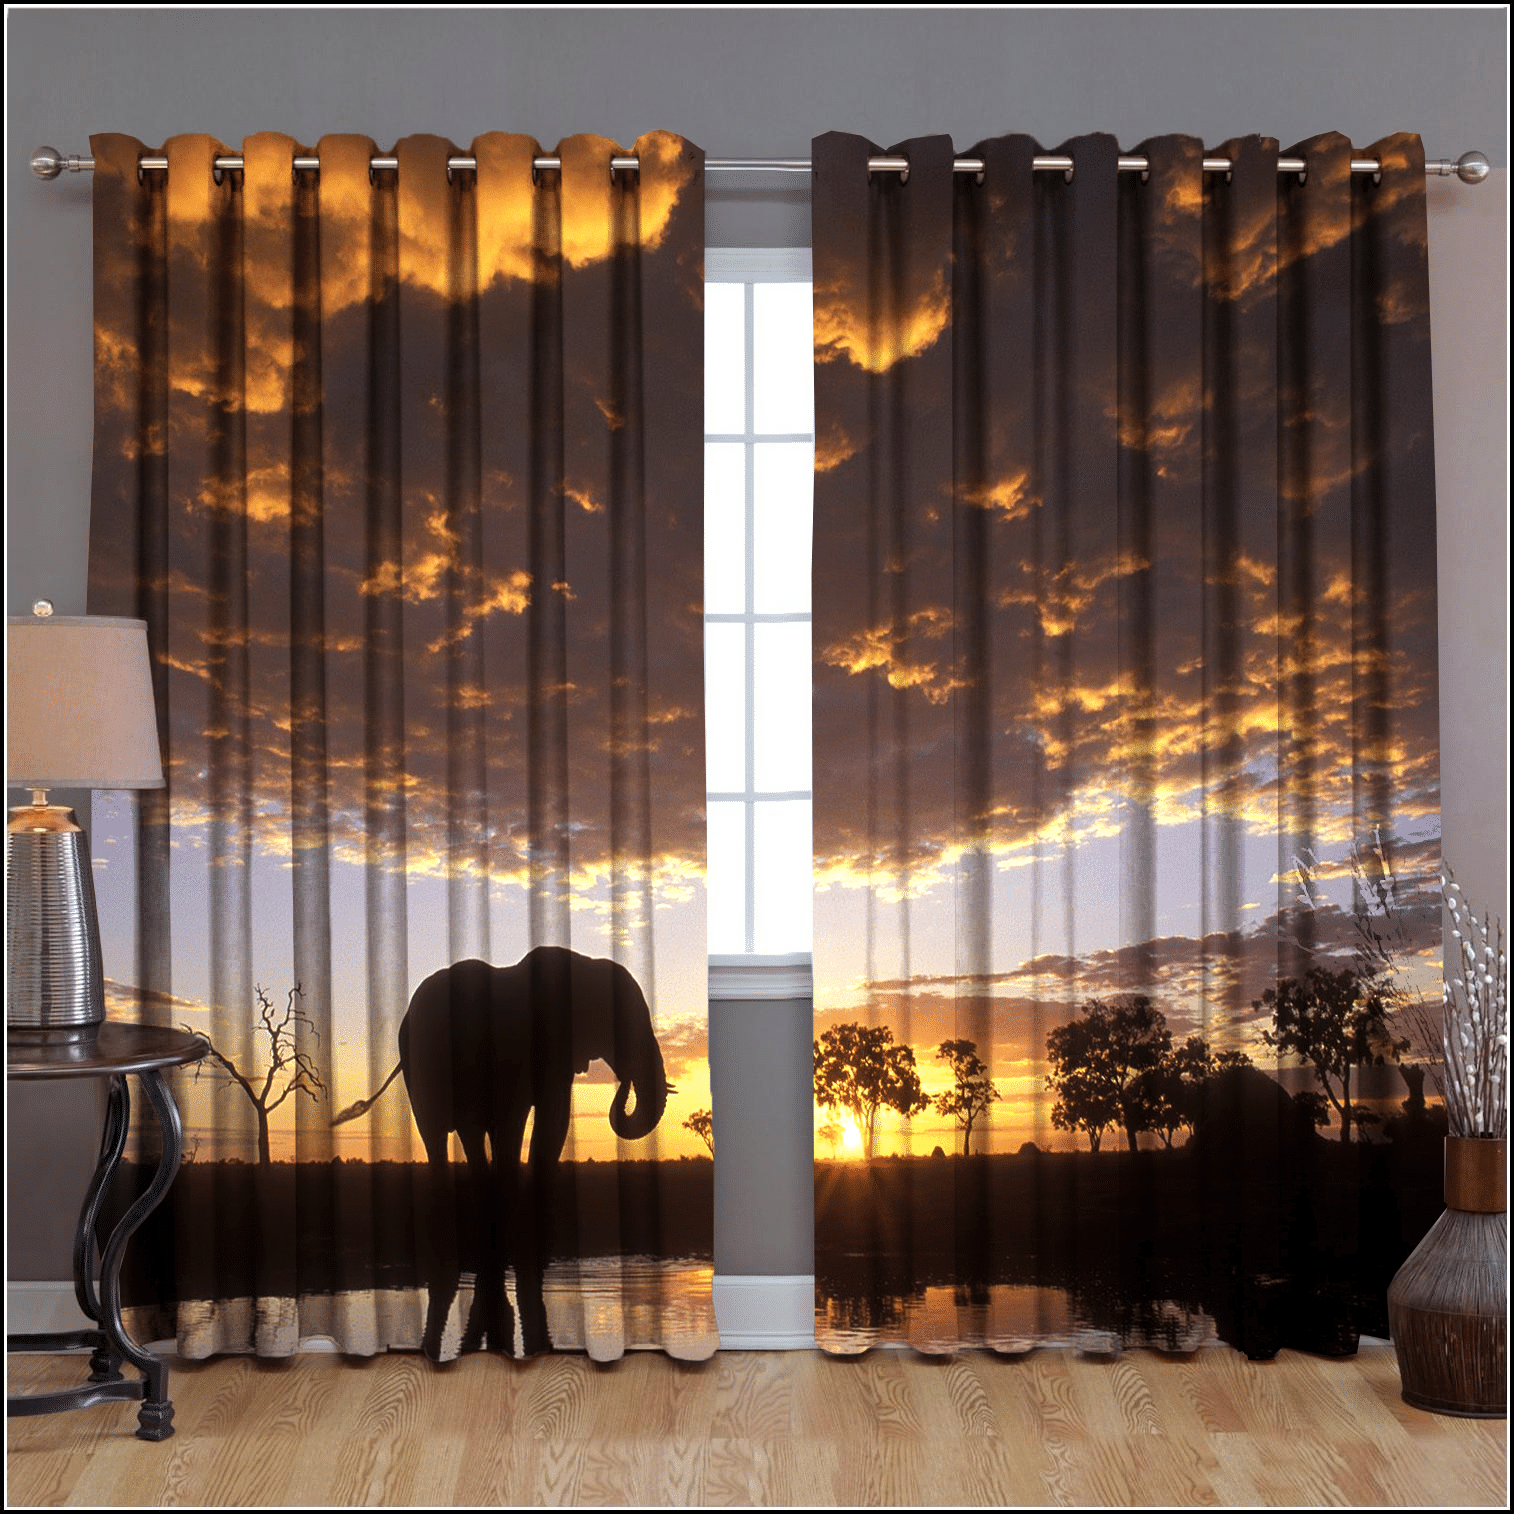 At Dawn Elephants Great Nature Printed Window Curtain